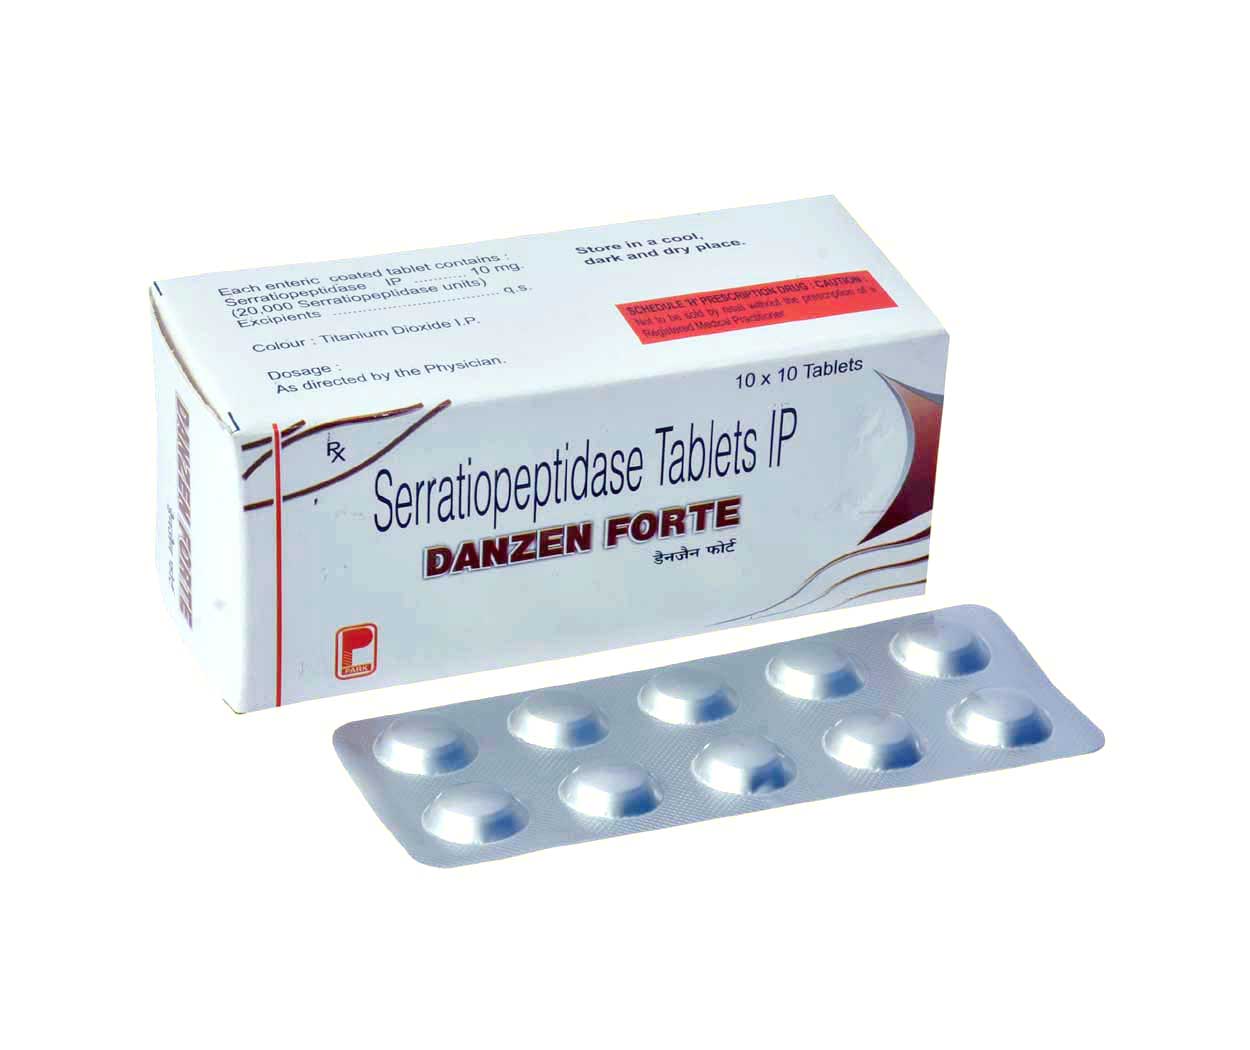 Product Name: DANZEN FORTE, Compositions of DANZEN FORTE are Serratiopeptidase Tablets IP - Park Pharmaceuticals